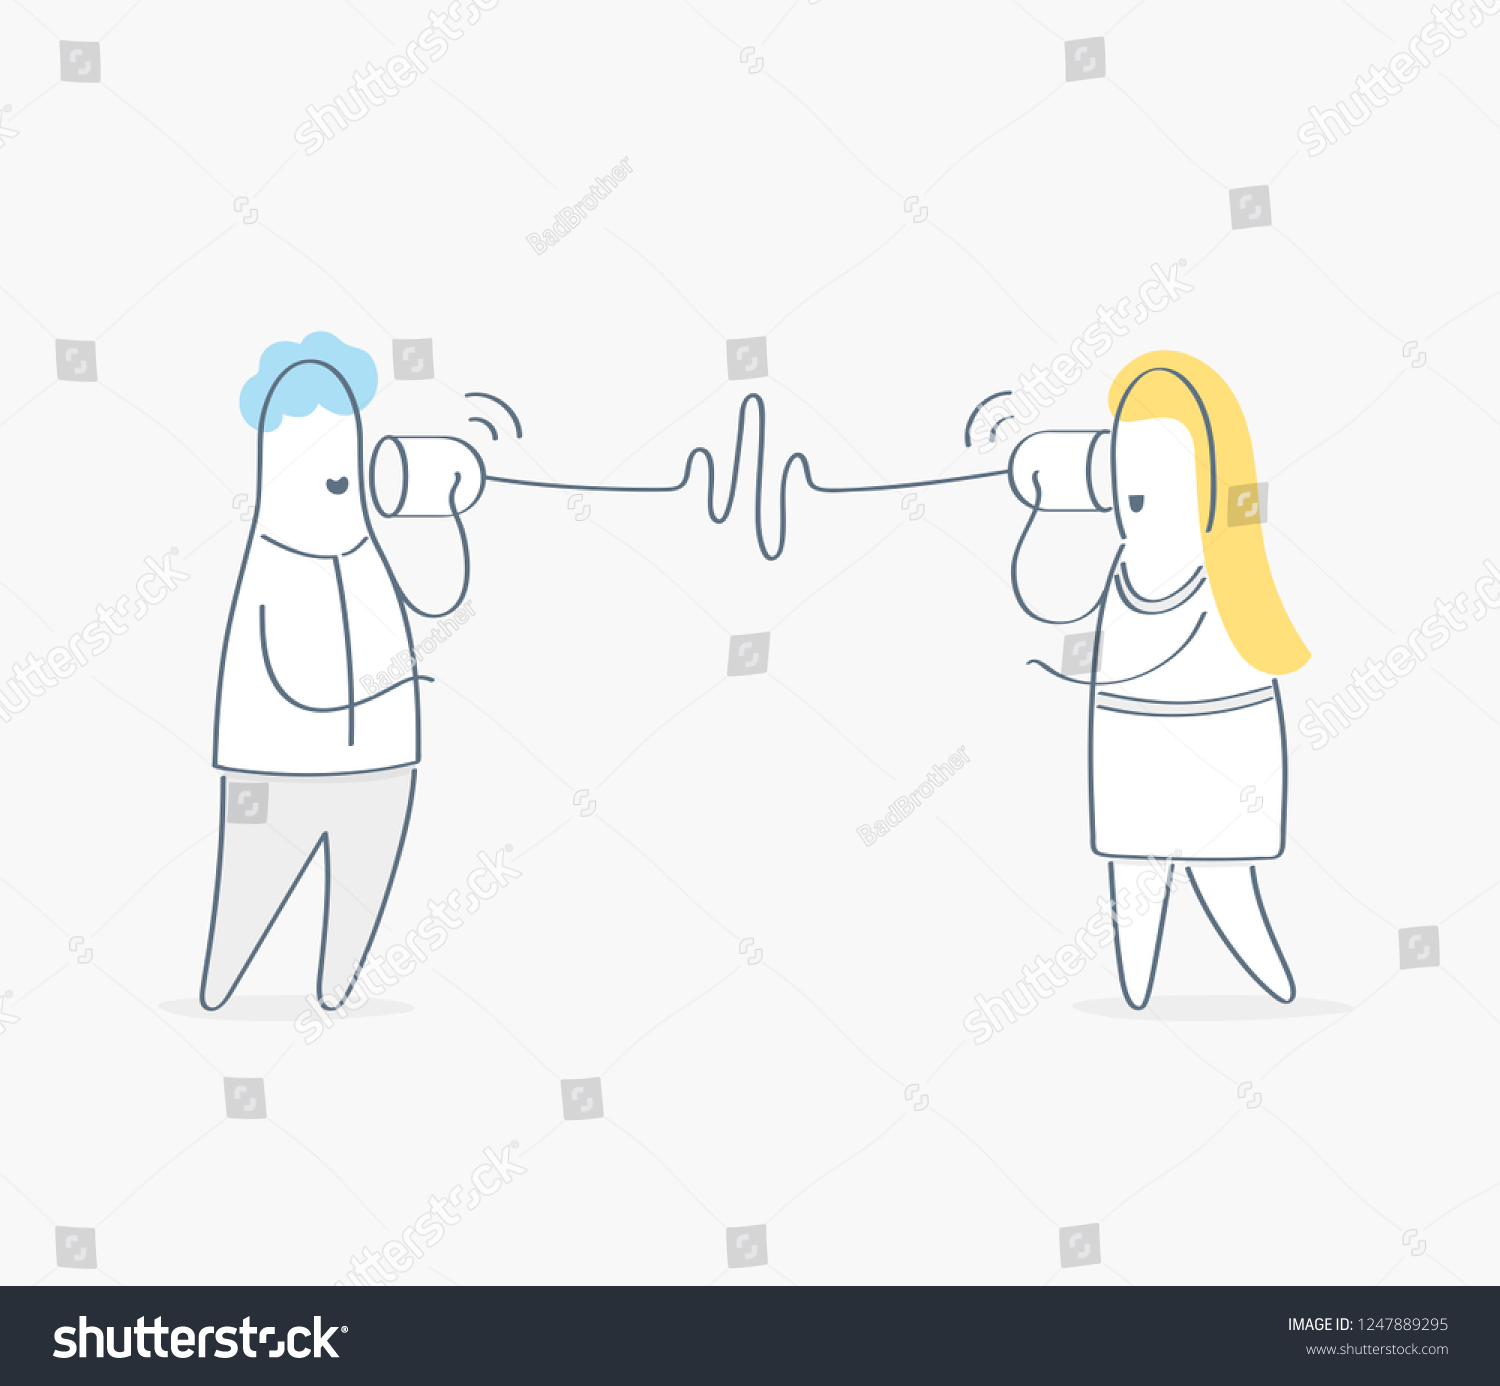 stock-vector-conversation-through-wire-connection-stretched-wire-between-two-people-with-wave-form-or-1247889295